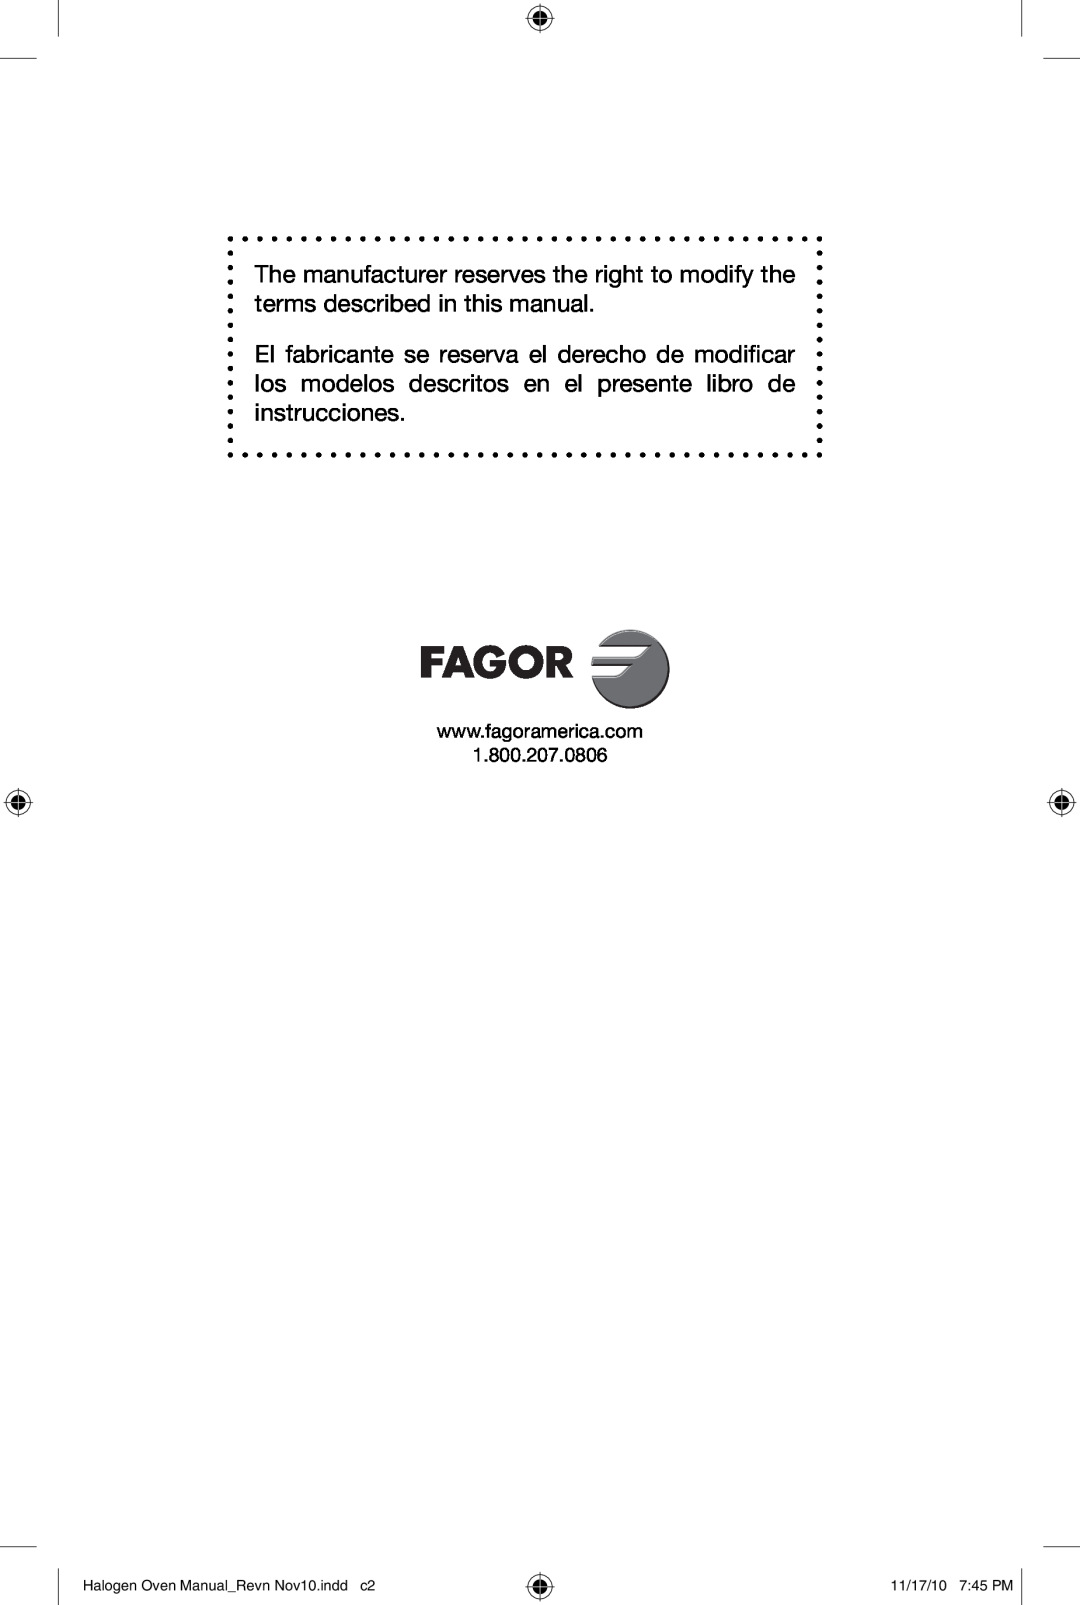 Fagor America 670040380 user manual The manufacturer reserves the right to modify the terms described in this manual 